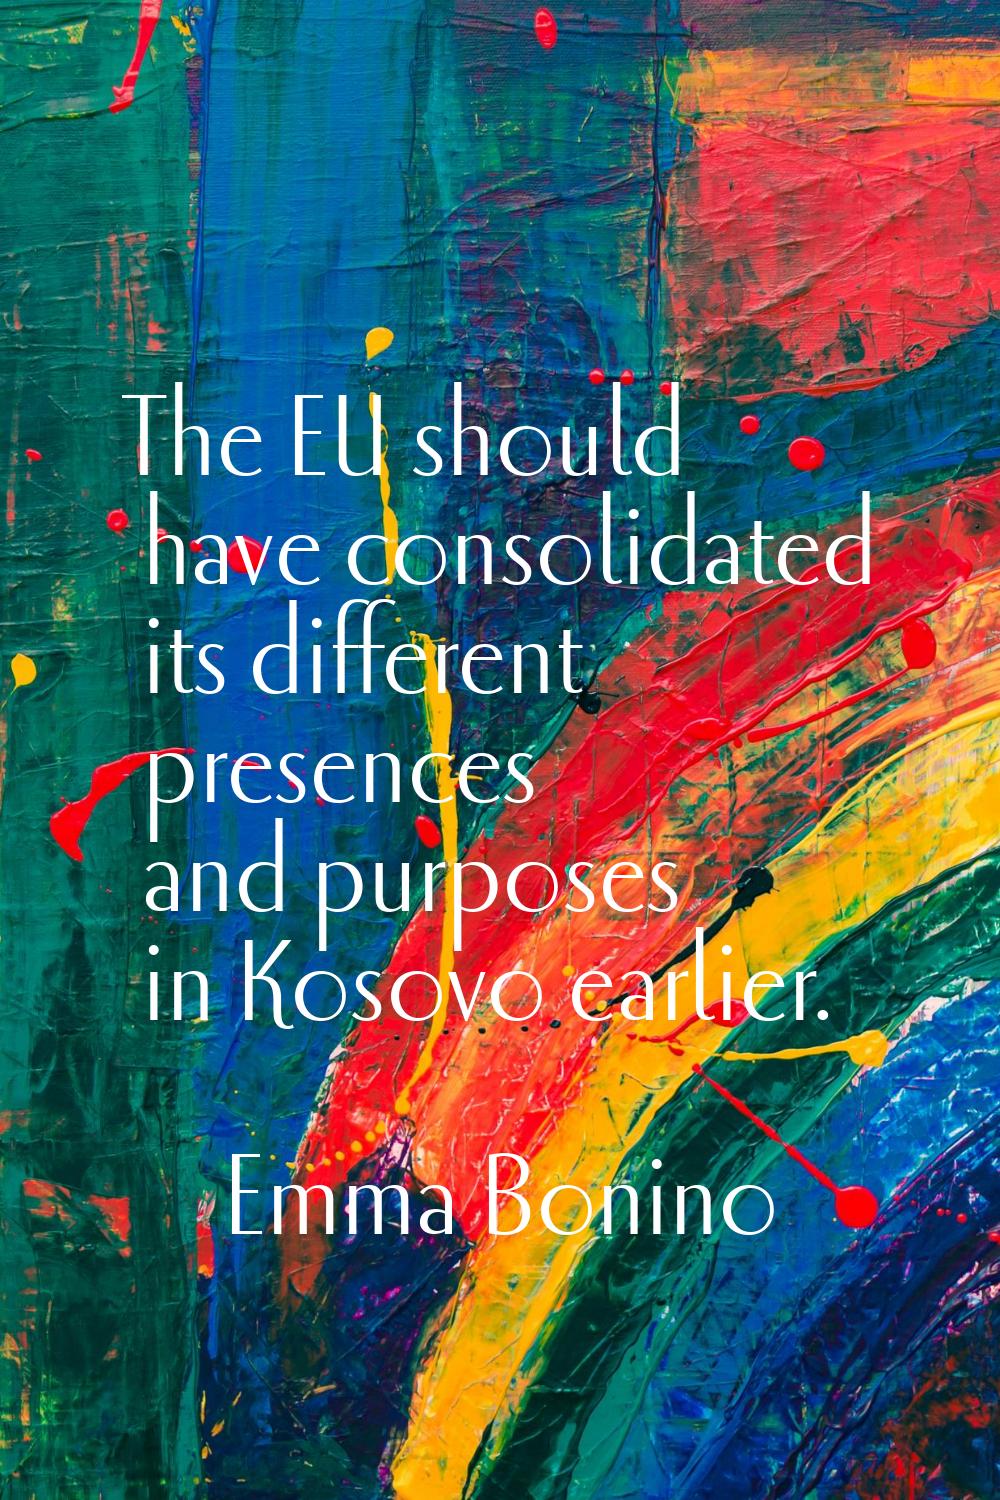 The EU should have consolidated its different presences and purposes in Kosovo earlier.